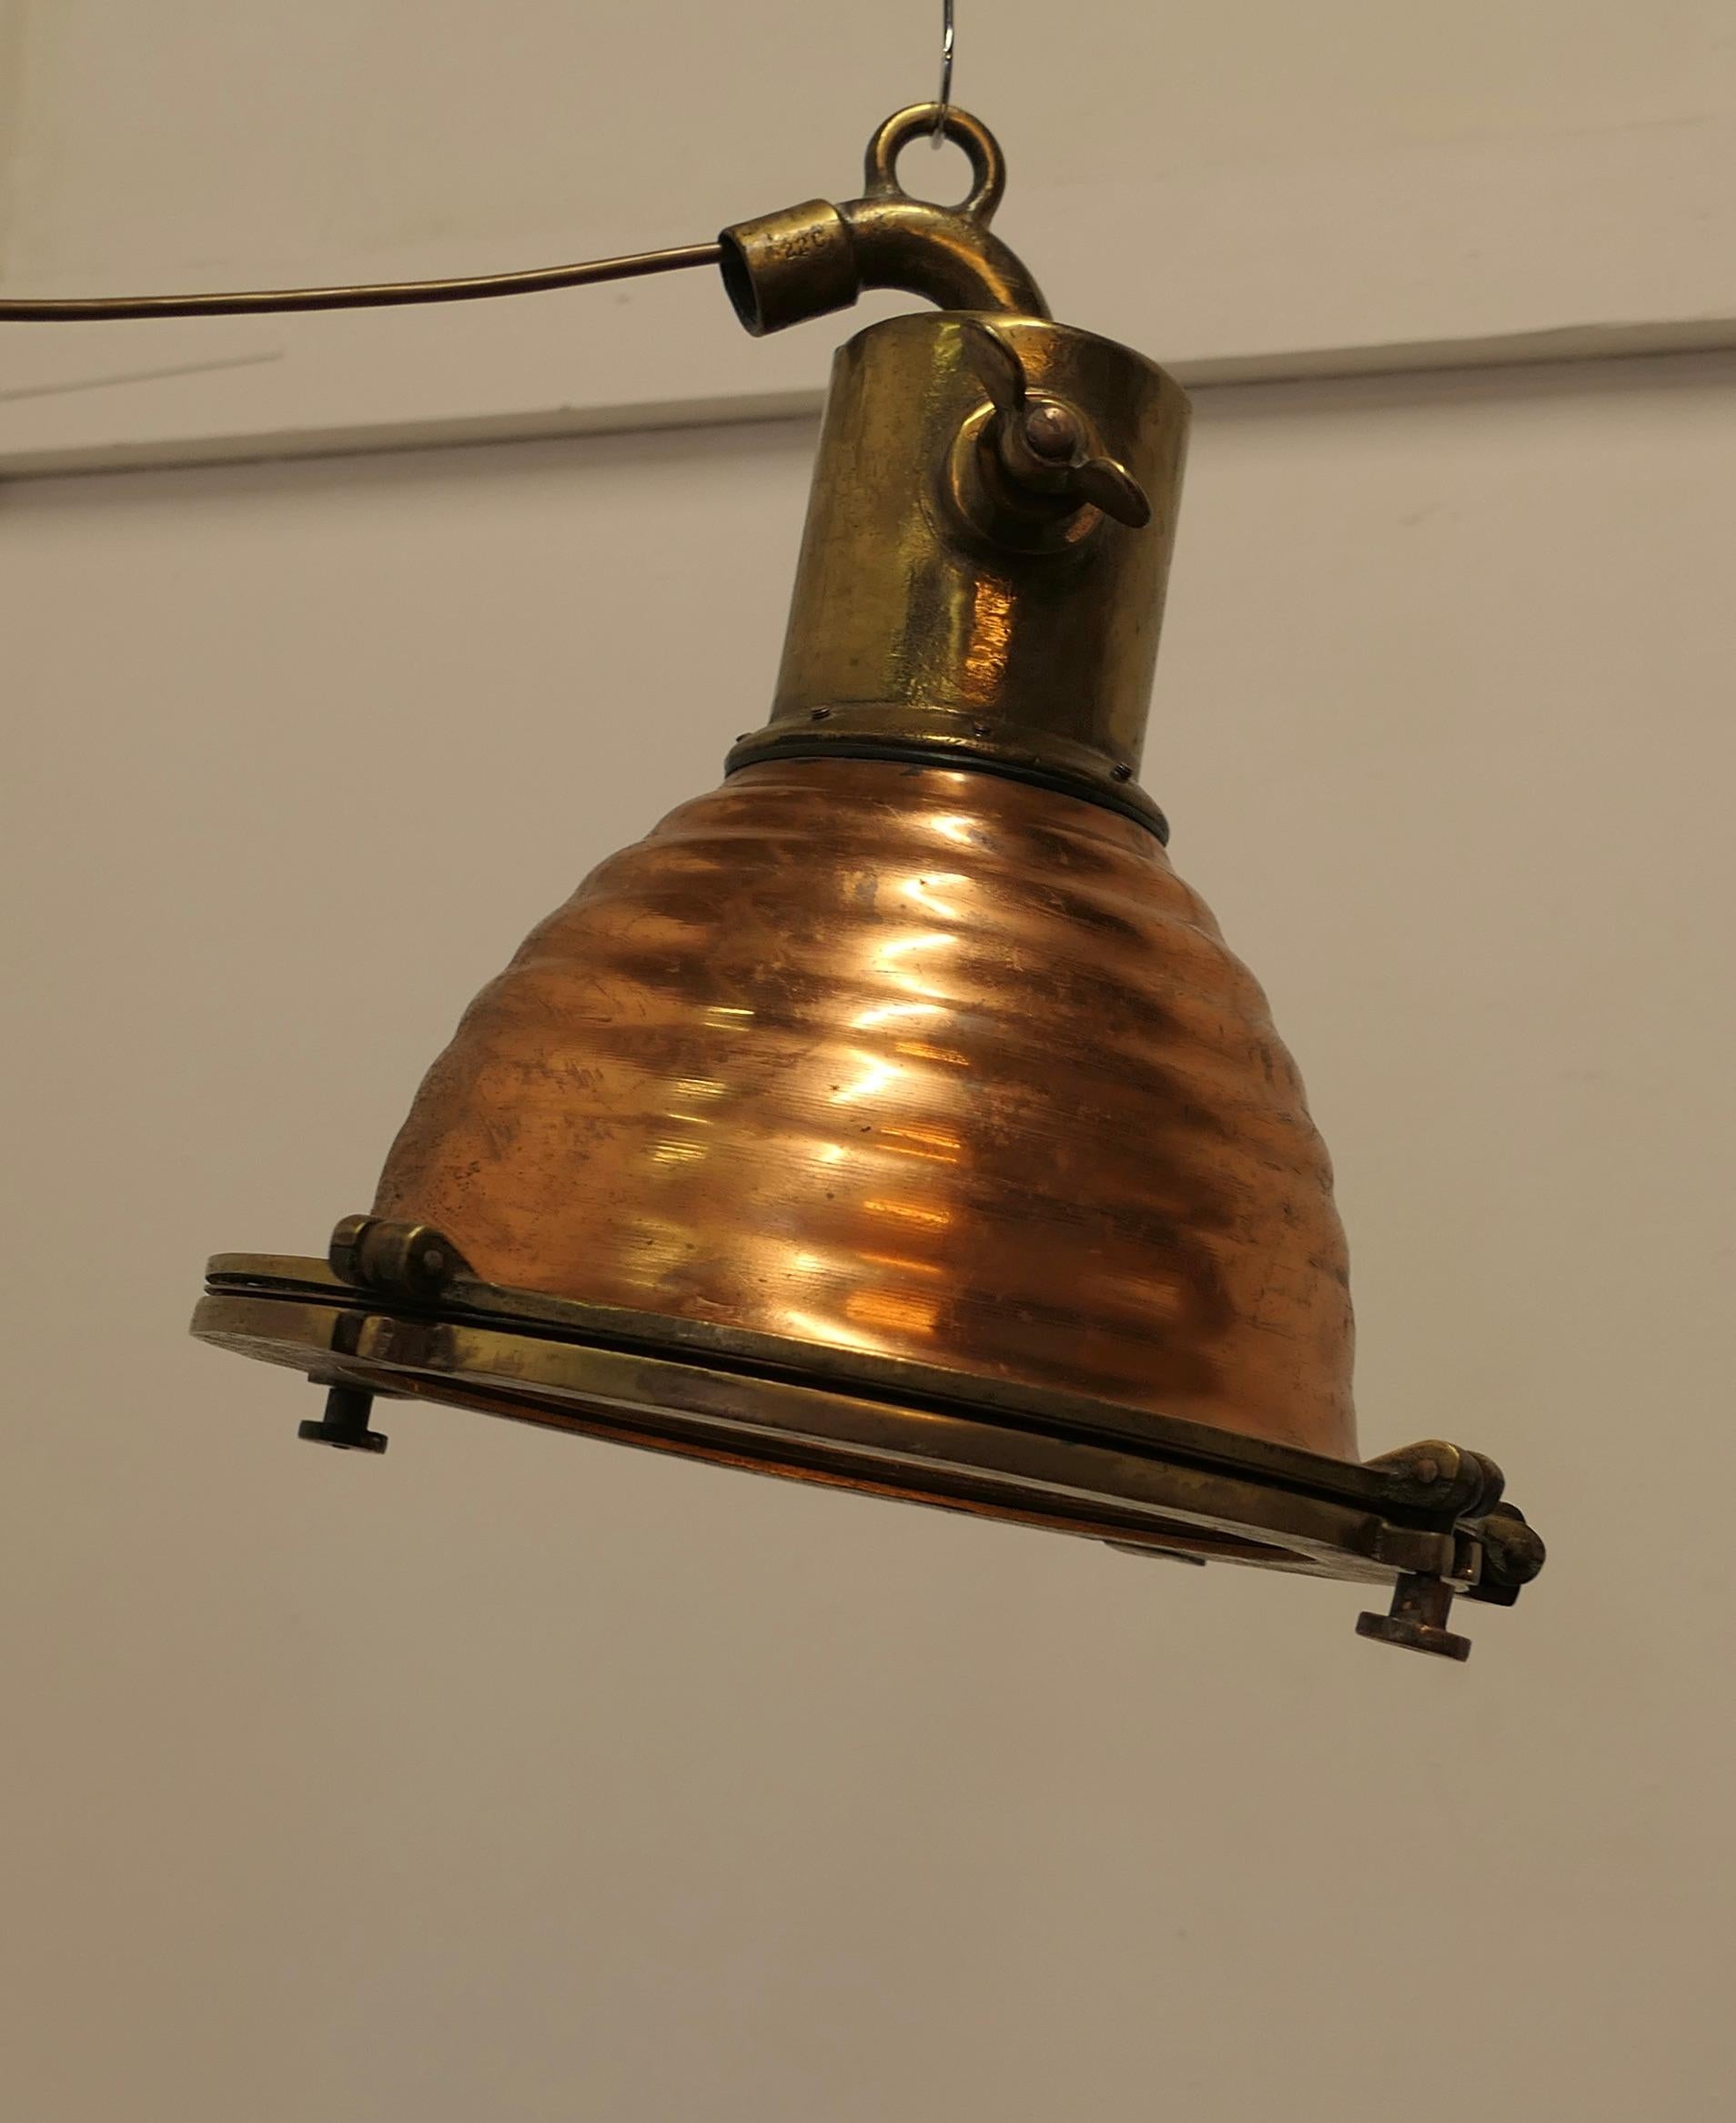 Copper and Brass Vintage Nautical Search Light or Spot Light  

The Lamp is in copper and brass it hangs from above with a 250 degree tilt and it has a porthole style cover 
The interior has a modern bulb holder which has been newly wired  
The Lamp